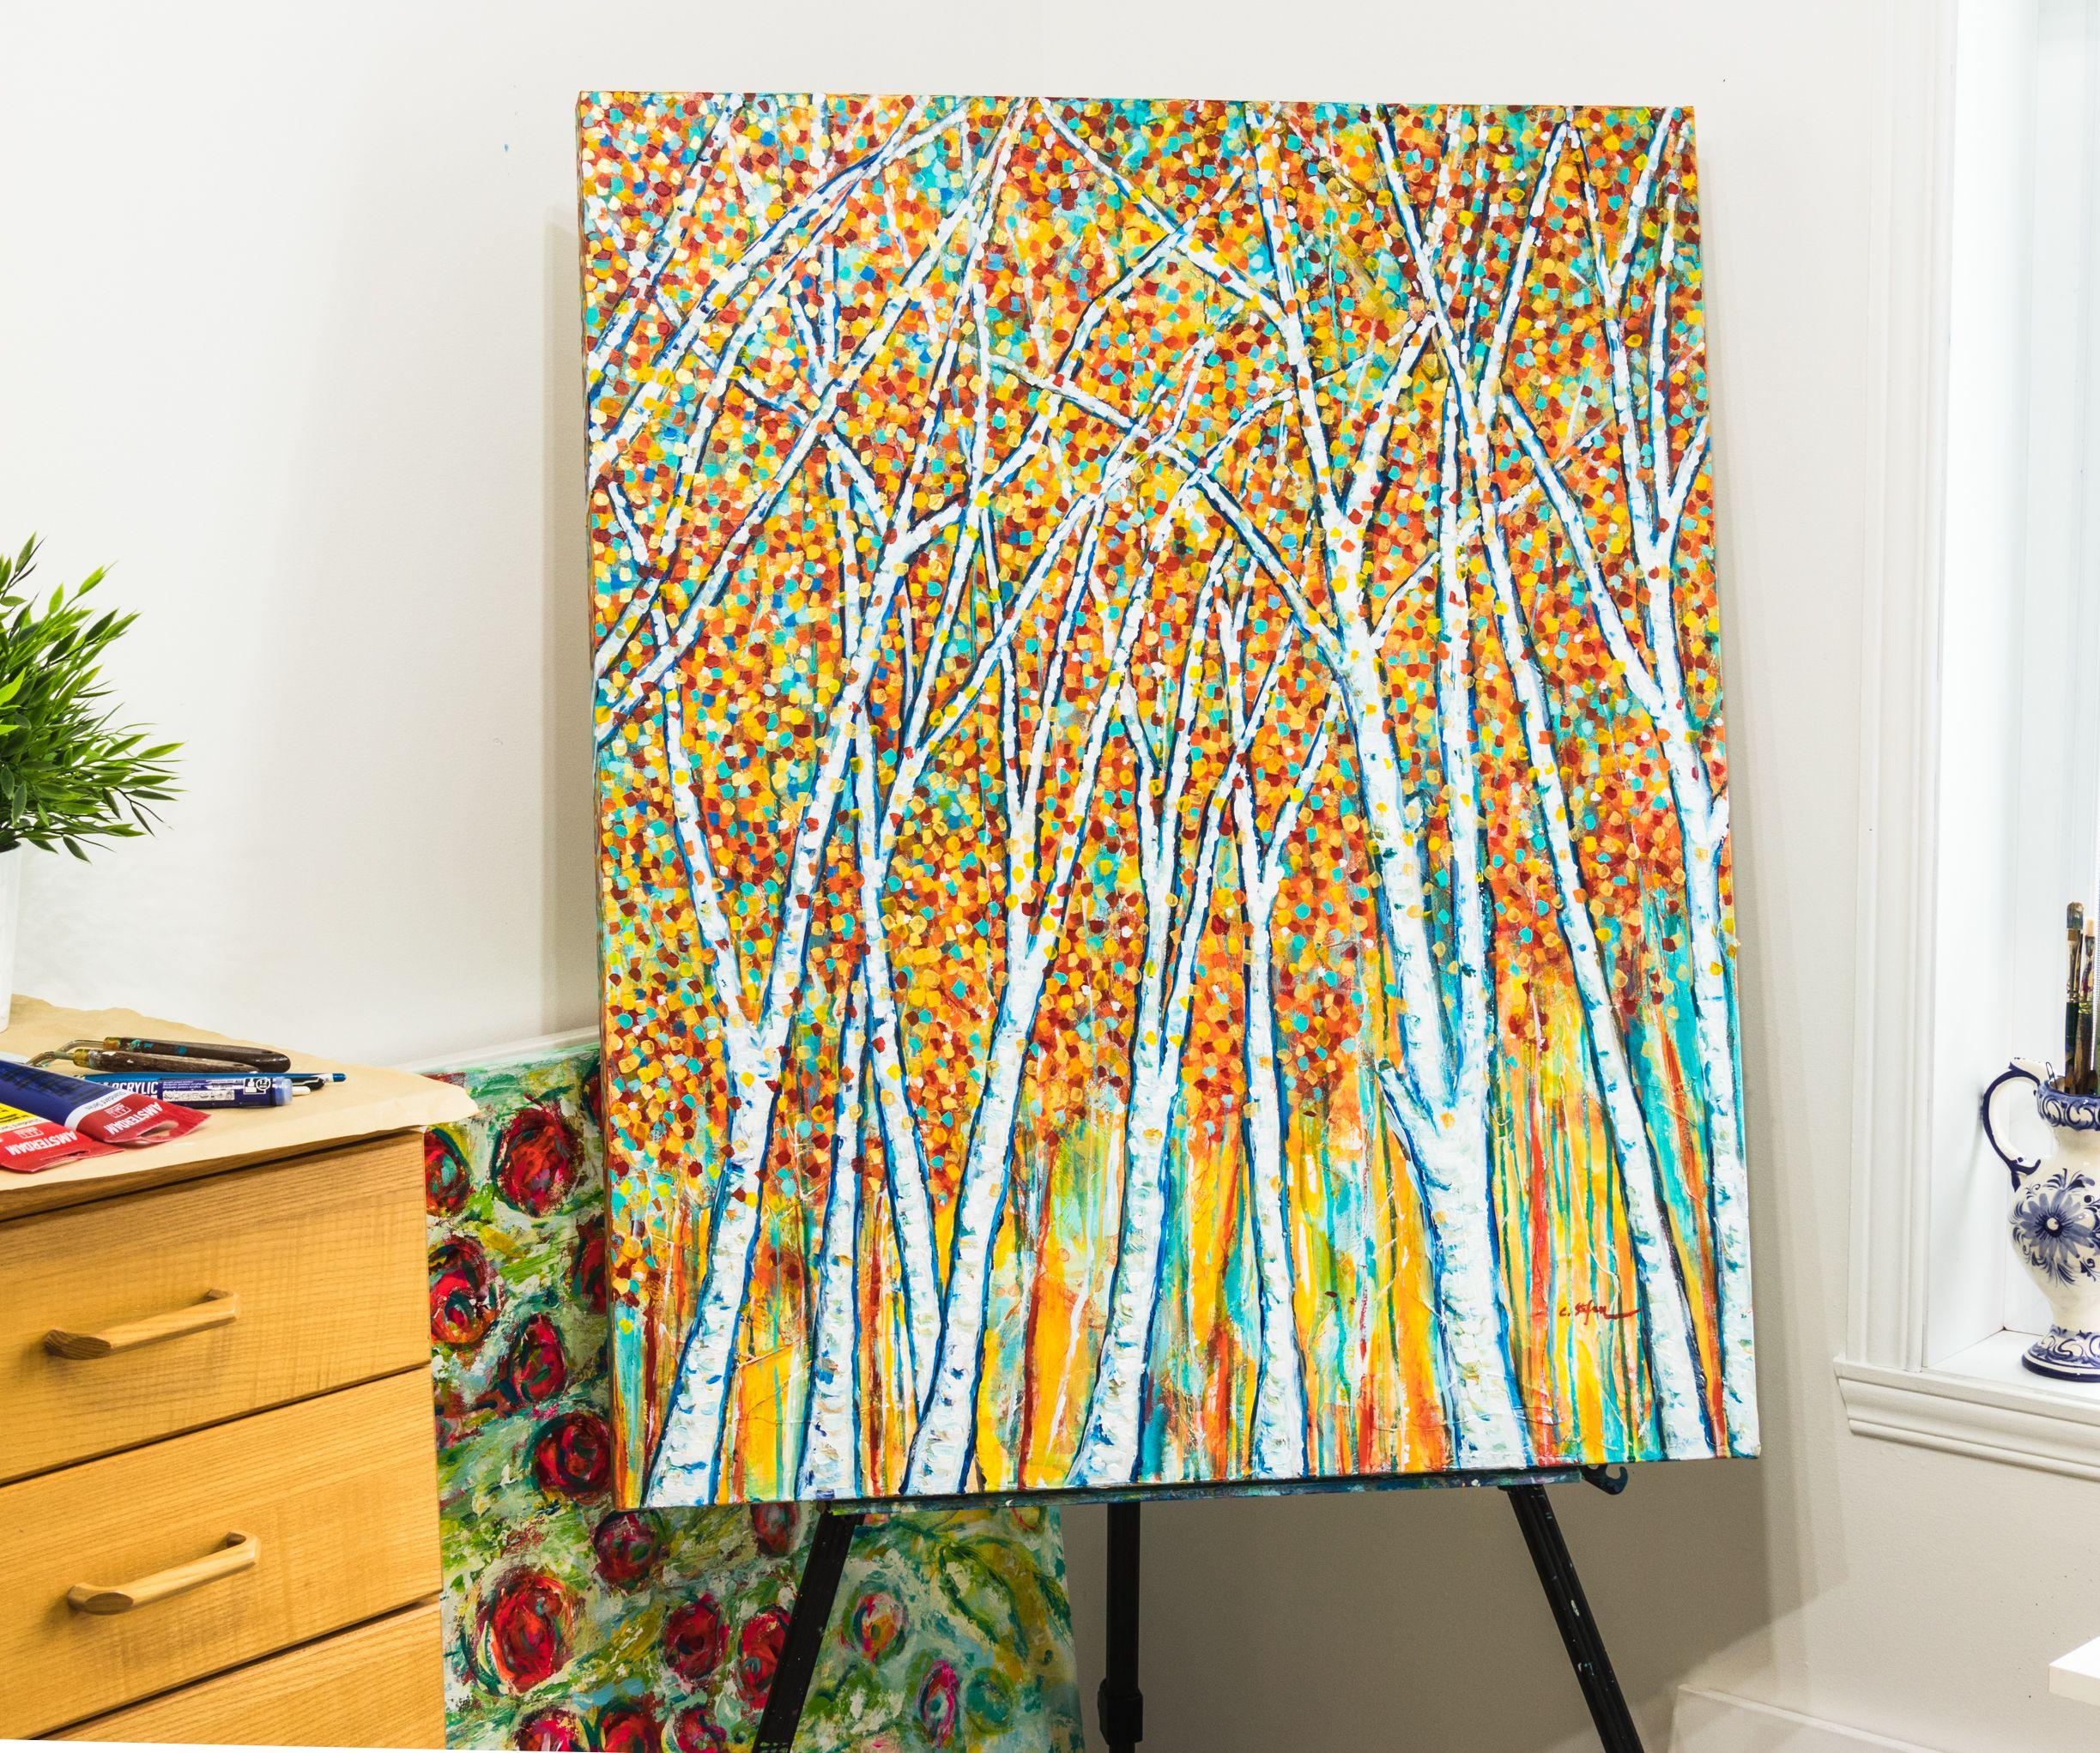 Painting: Acrylic on Canvas.    Autumn Trees  Impressionist painting, technique of pointillism.  In the foliage of the trees, I also used golden metallic paint, which brings more brilliance to the painting when it is hung on the wall.    The